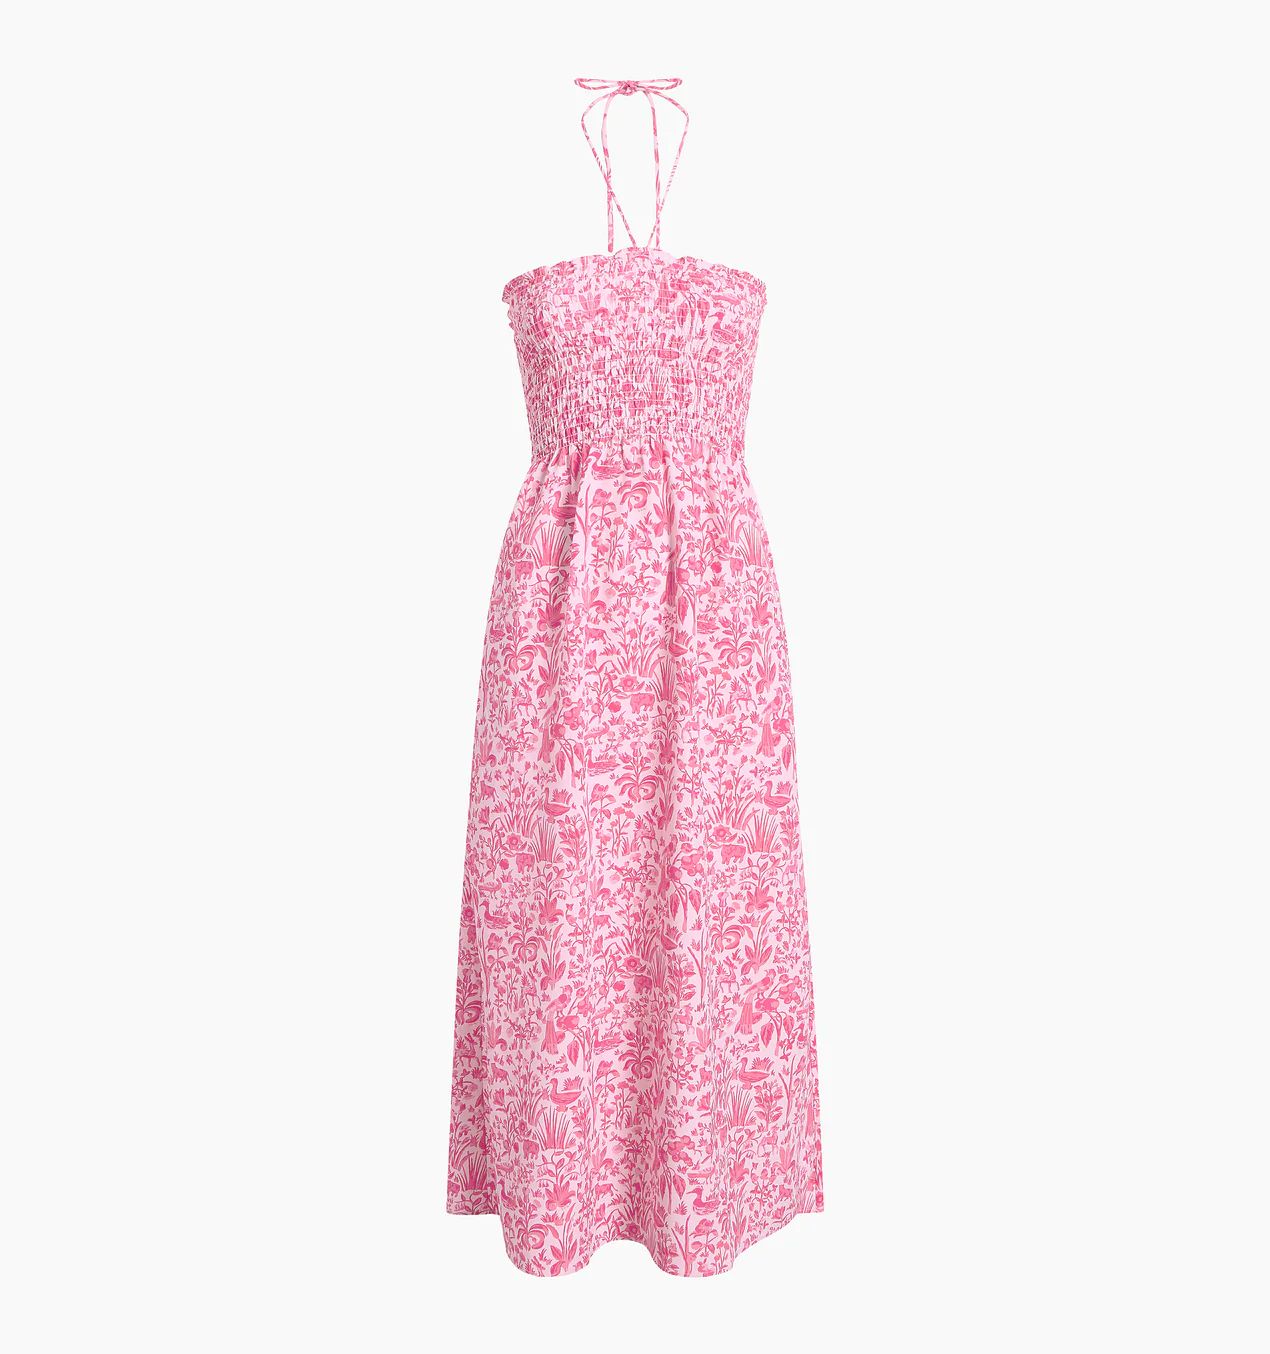 The Lucy Dress - Strawberry Daiquiri Sherwood Forest | Hill House Home